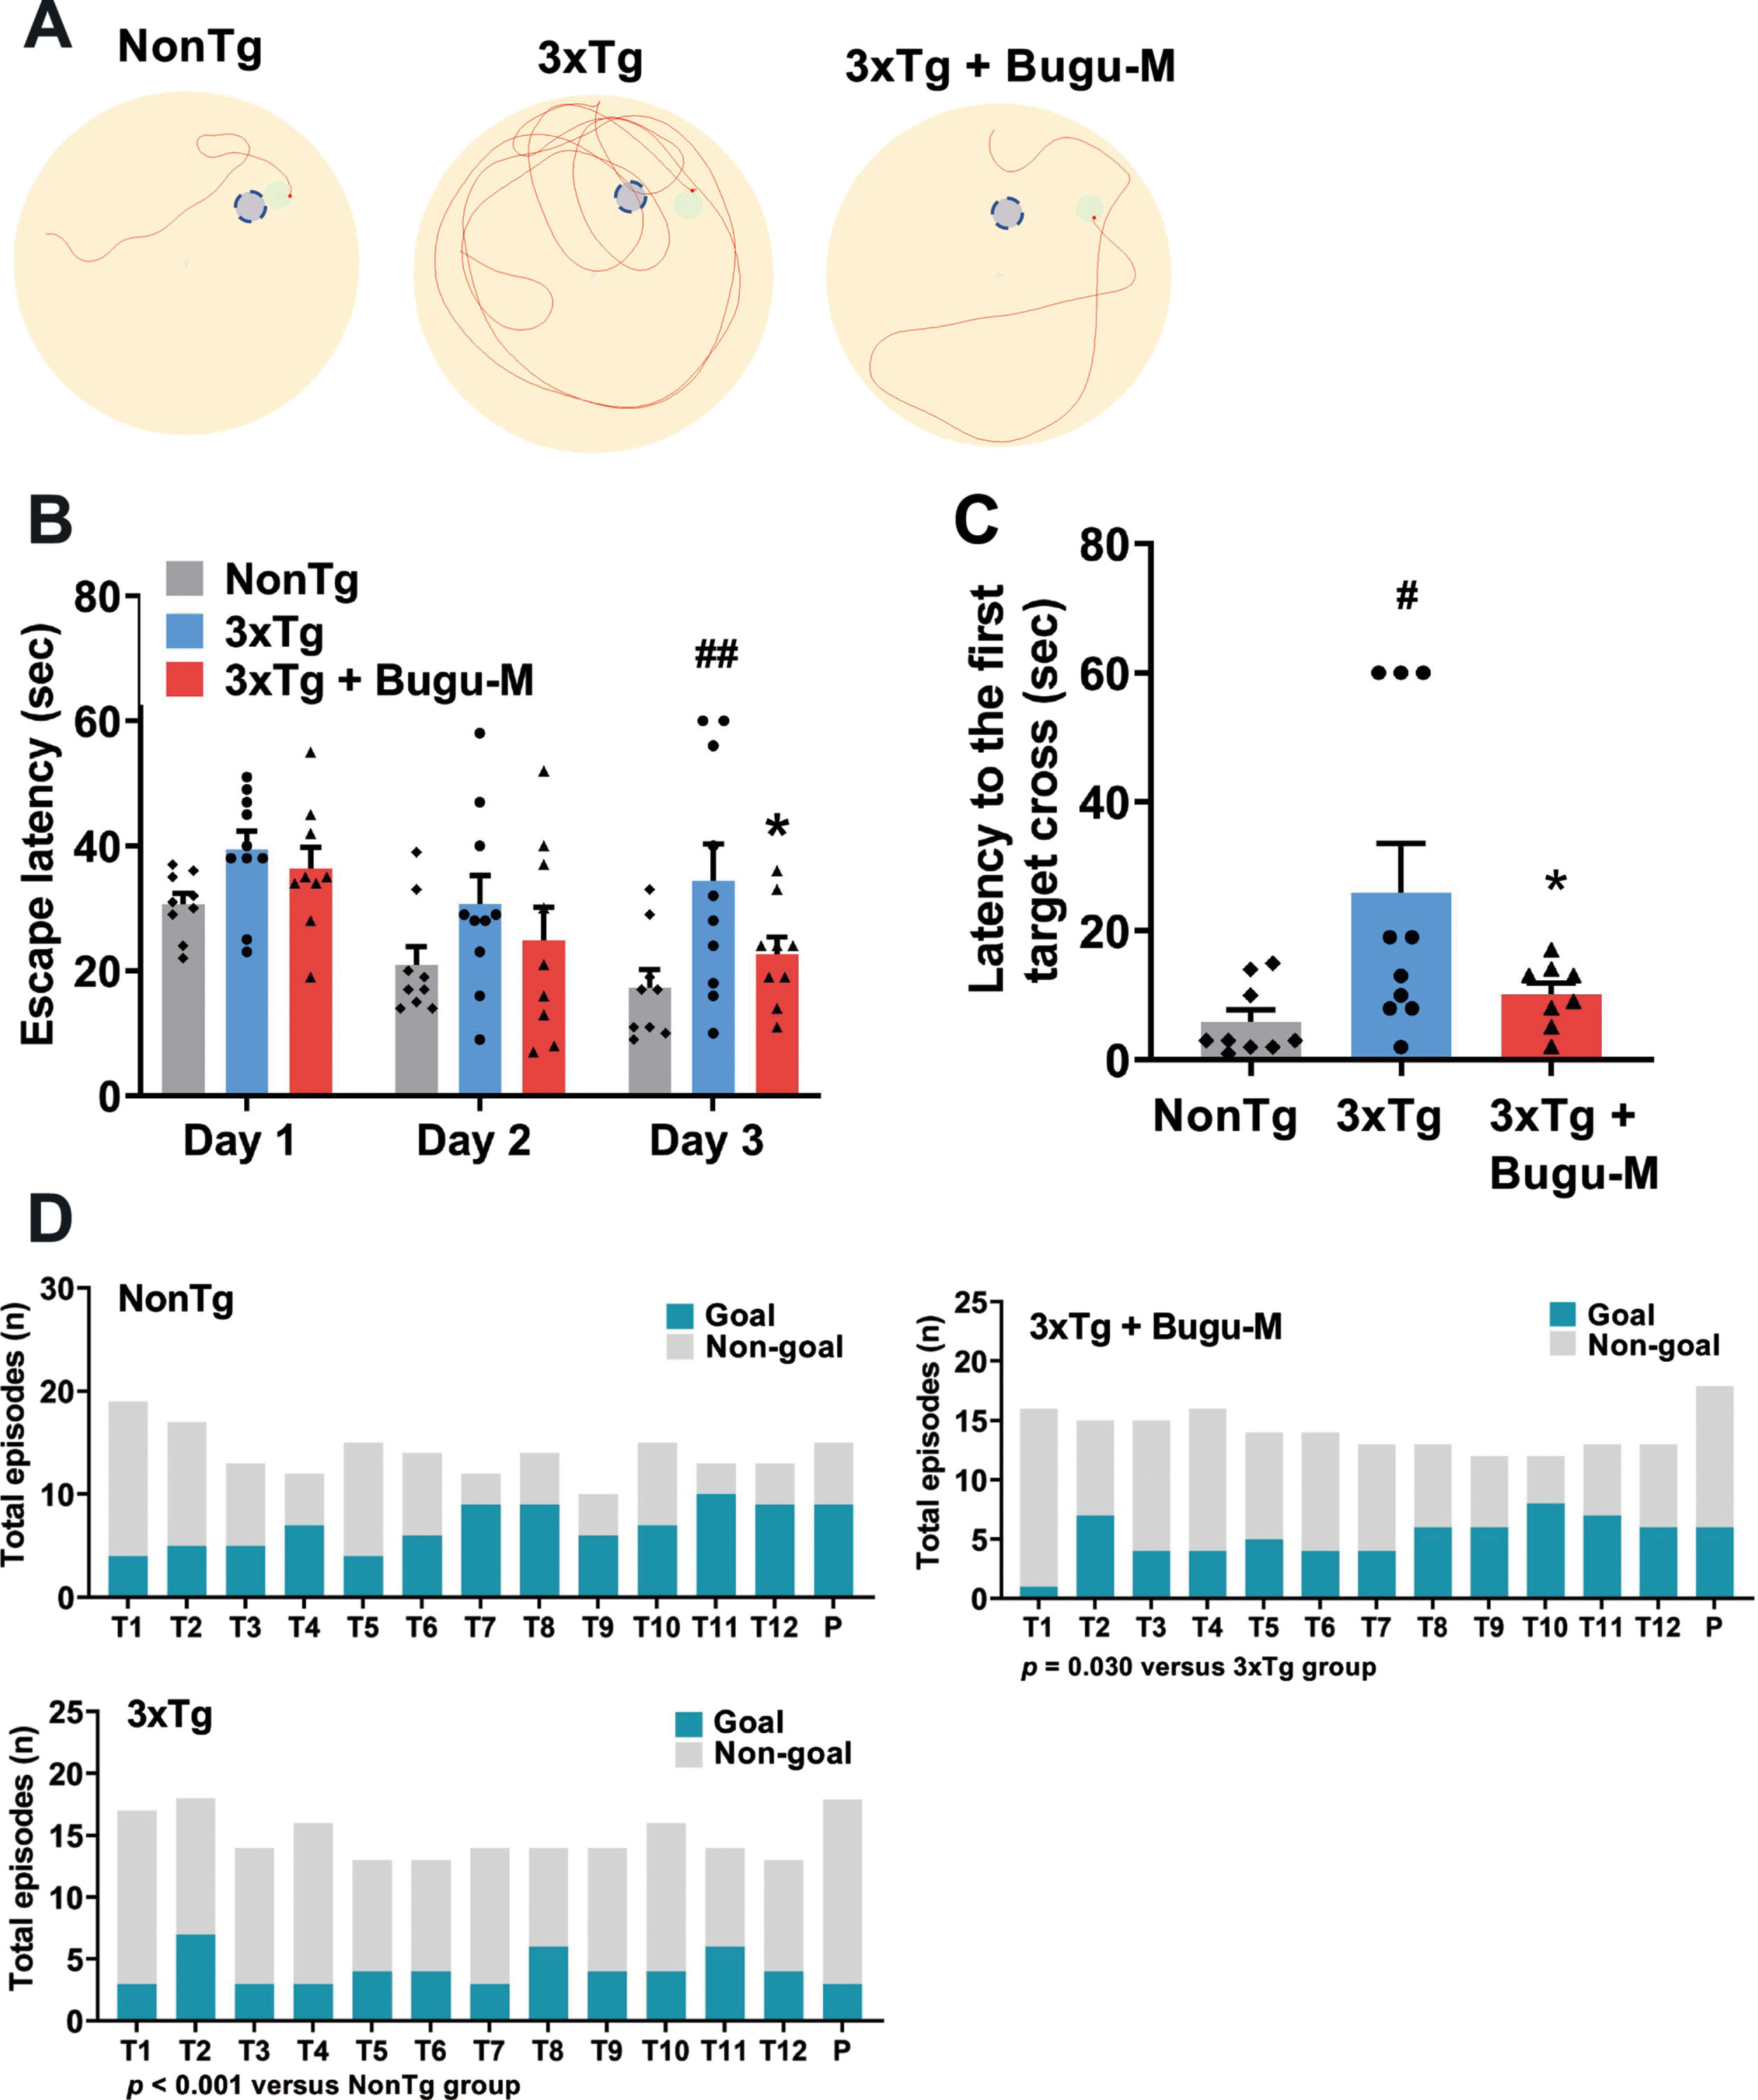 Bugu-M improves MWM performance in 3-month 3×Tg-AD mice. MWM test for movement track (A), the assessment of escape latencies to arrive visible platform over days 1–3 (B) and with hidden platform on day 4 after removing the platform (C), and goal- versus non-goal-directed strategies (D) for 3×Tg-AD and NonTg mice. Data are presented as mean±SEM (n = 8–10 per group). For escape latencies, differences among groups were determined by one-way ANOVA and Fisher’s LSD test. #p < 0.05 and ##p < 0.01 versus NonTg control; *p < 0.05 versus 3×Tg-AD group. The frequency of use of various search strategies (operationally defined as per [42]) was calculated across trials and analyzed using logistic regression. Statistical results are provided below each panel.